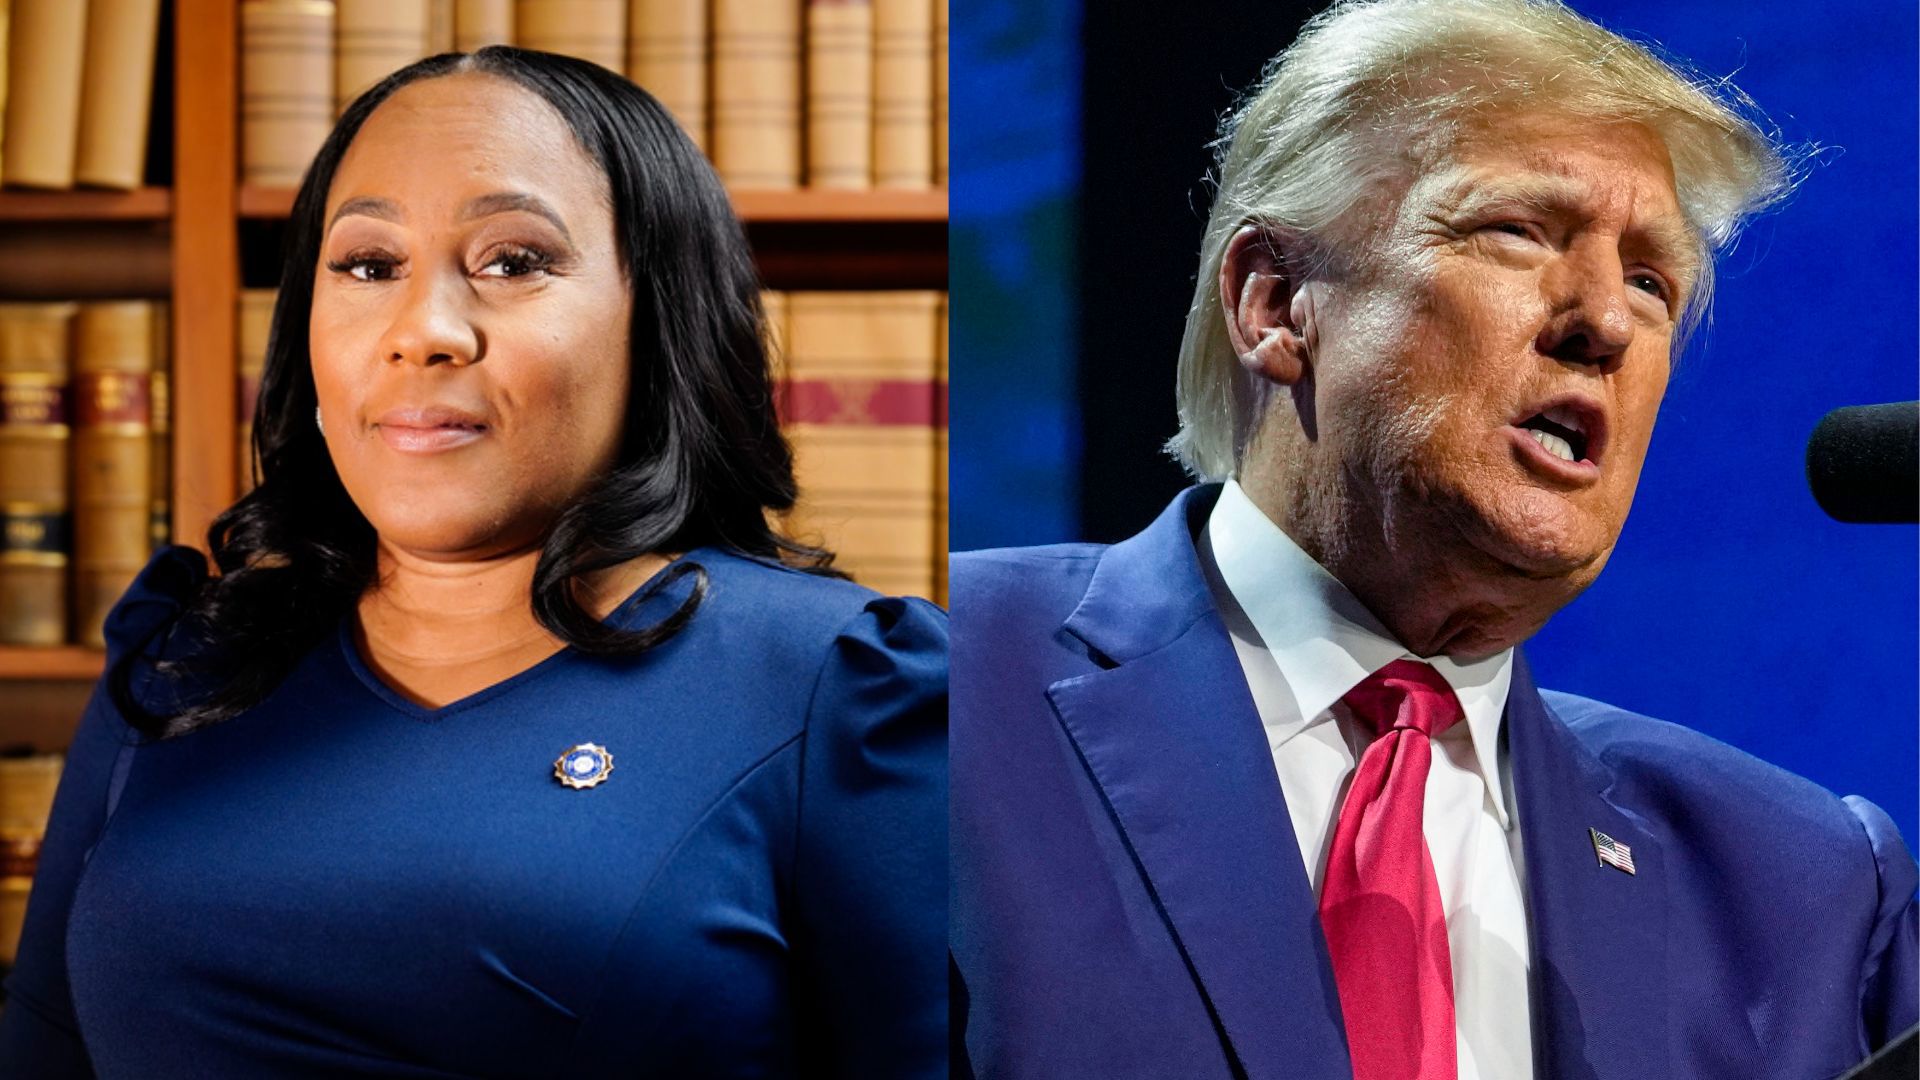 A federal house committee is launching a probe into Fulton County District Attorney Fani Willis' handling of the indictment of former U.S. President Donald Trump.